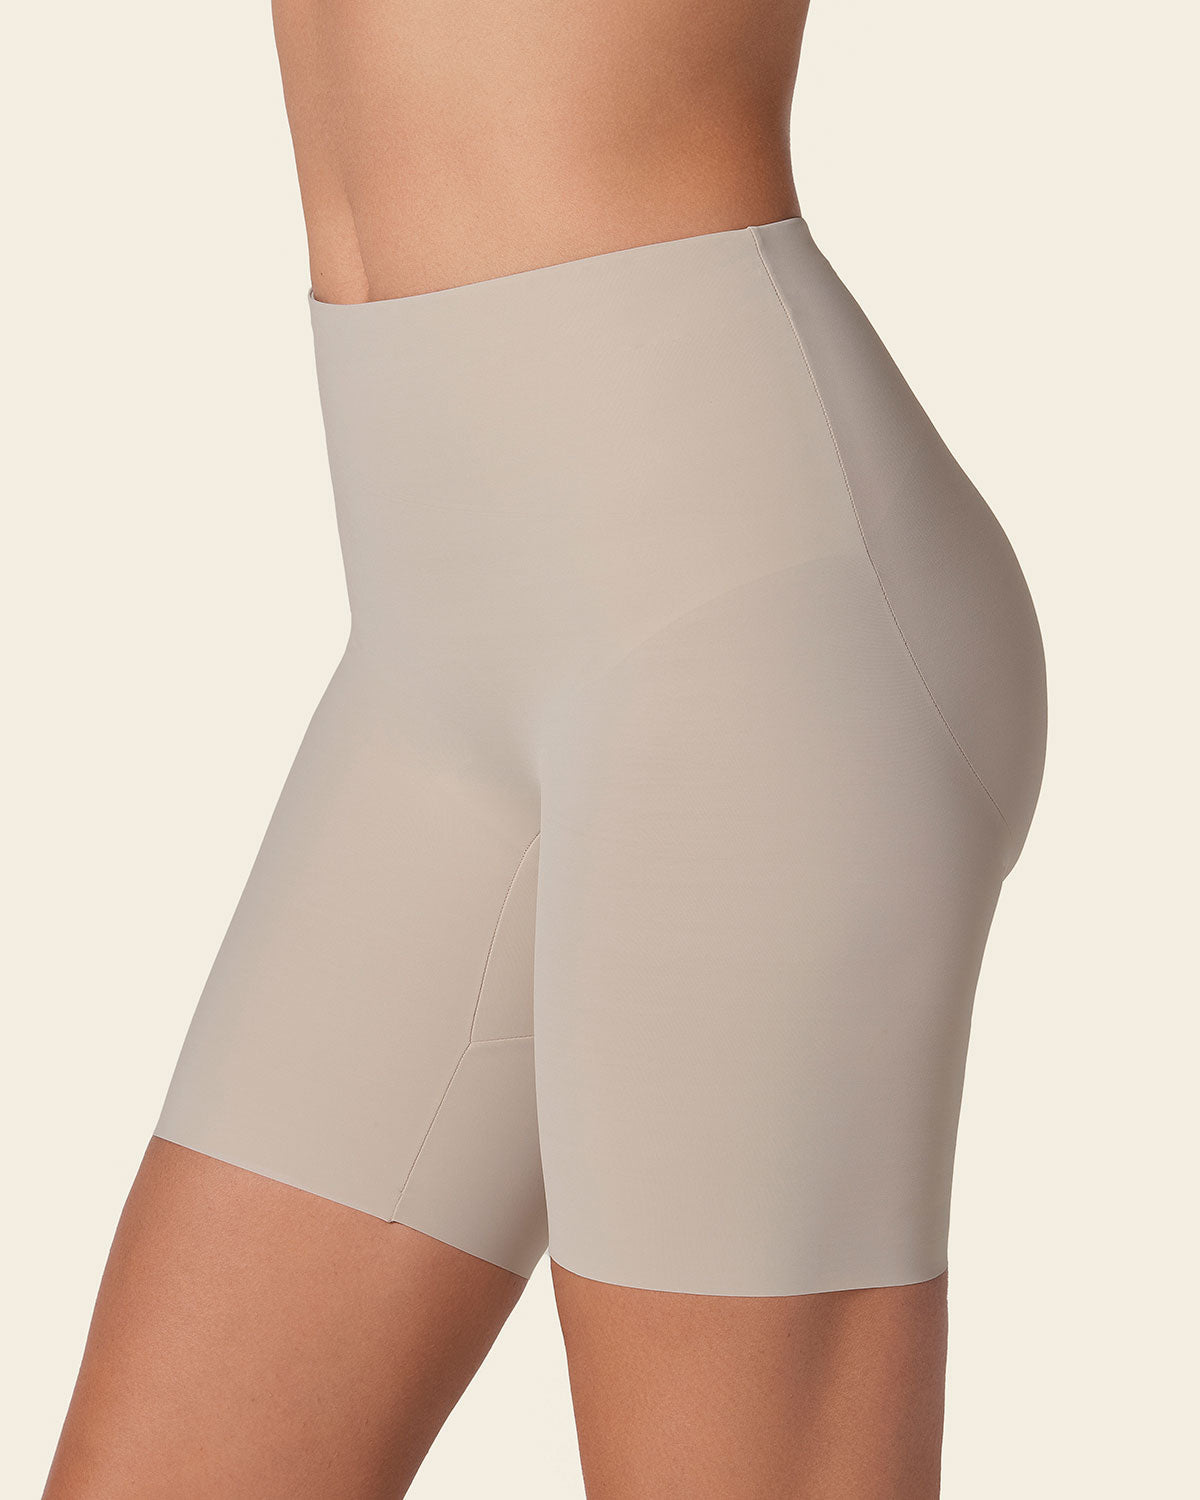 Spanx Active Women's Shaping Compression Knee India